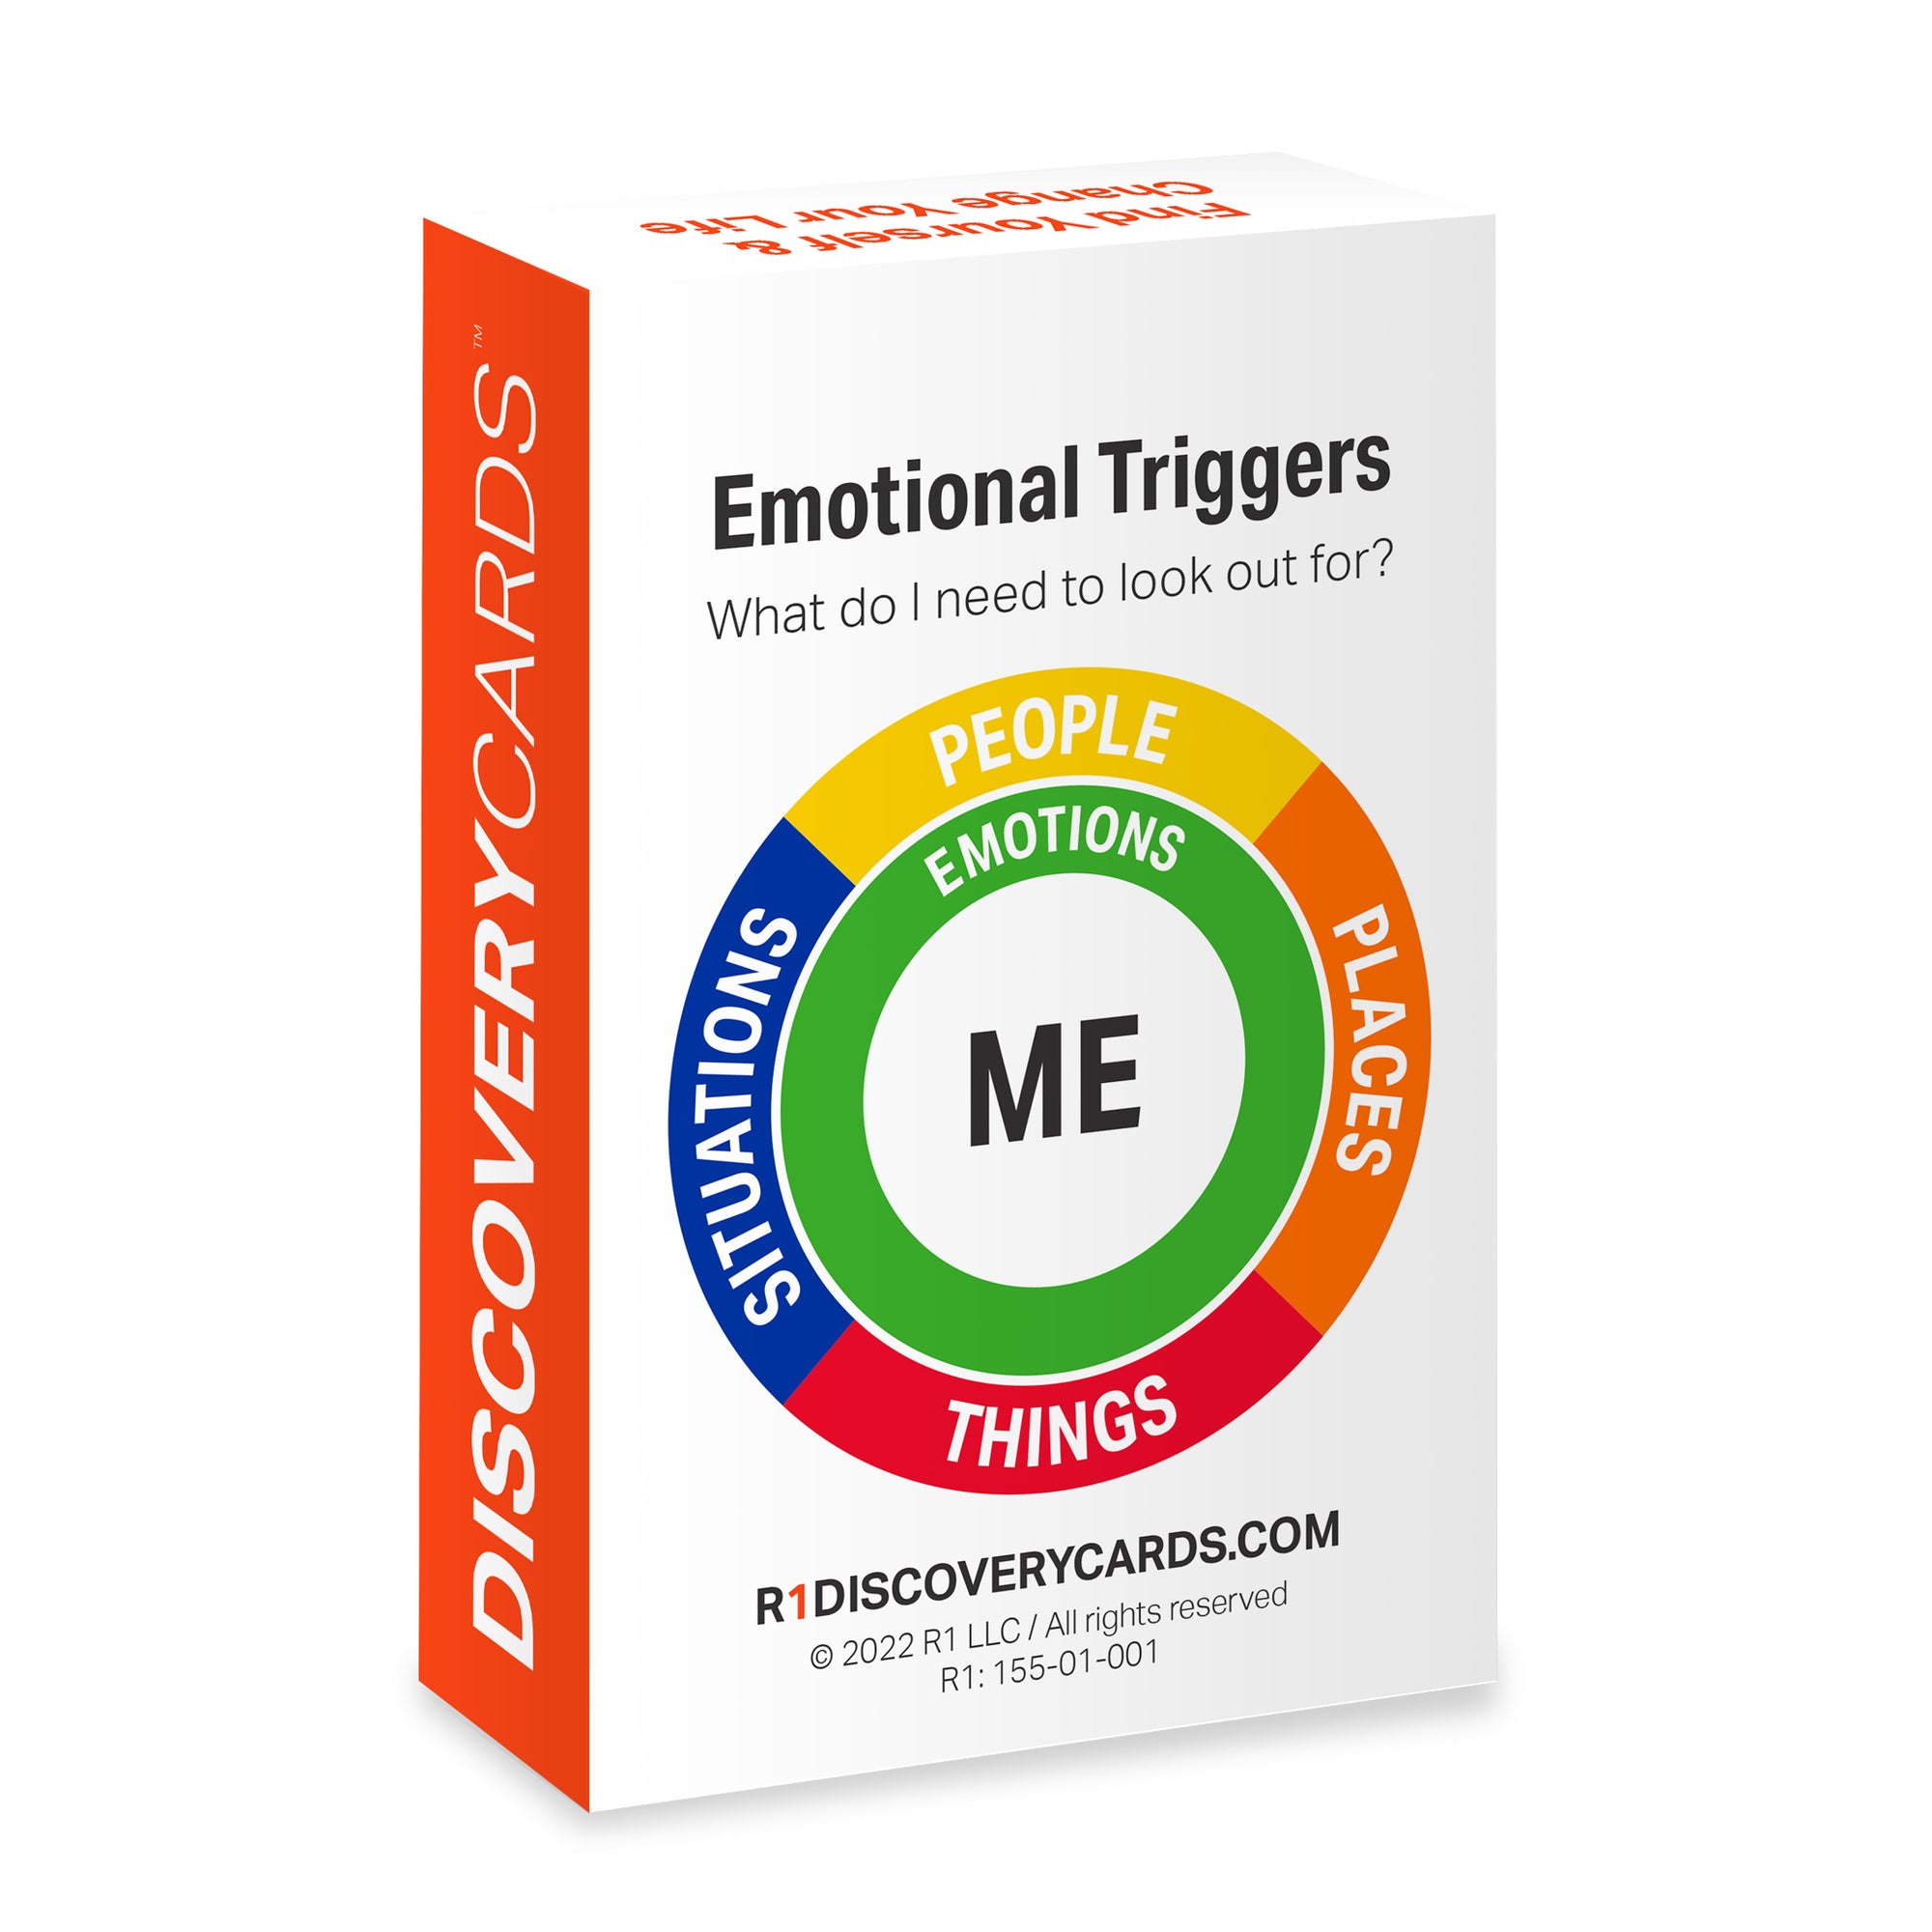 Emotional Triggers Discovery Cards Value Pack — 6 decks